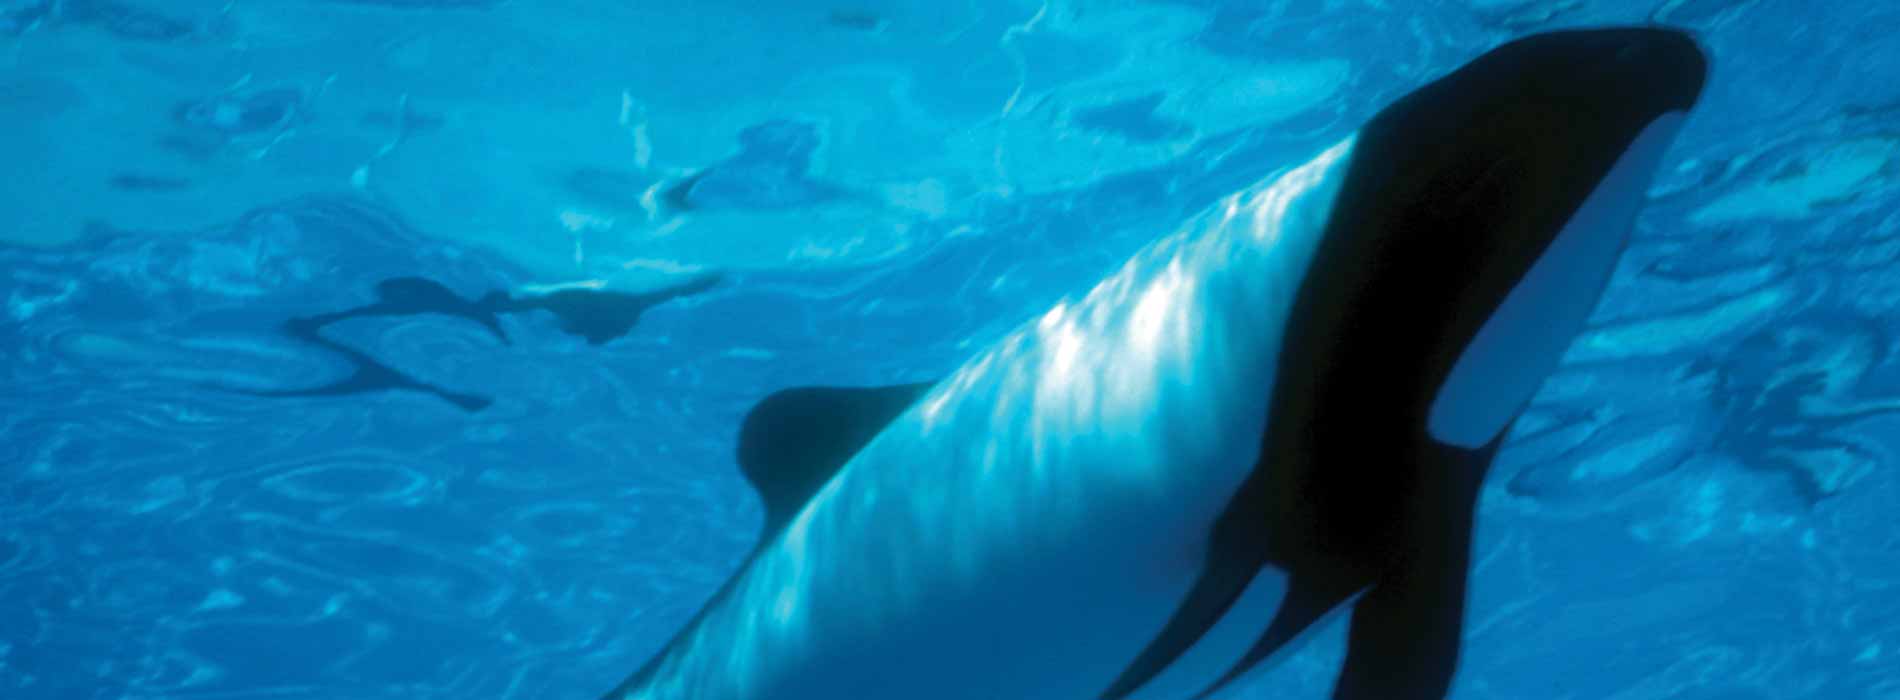 Commerson's Dolphin